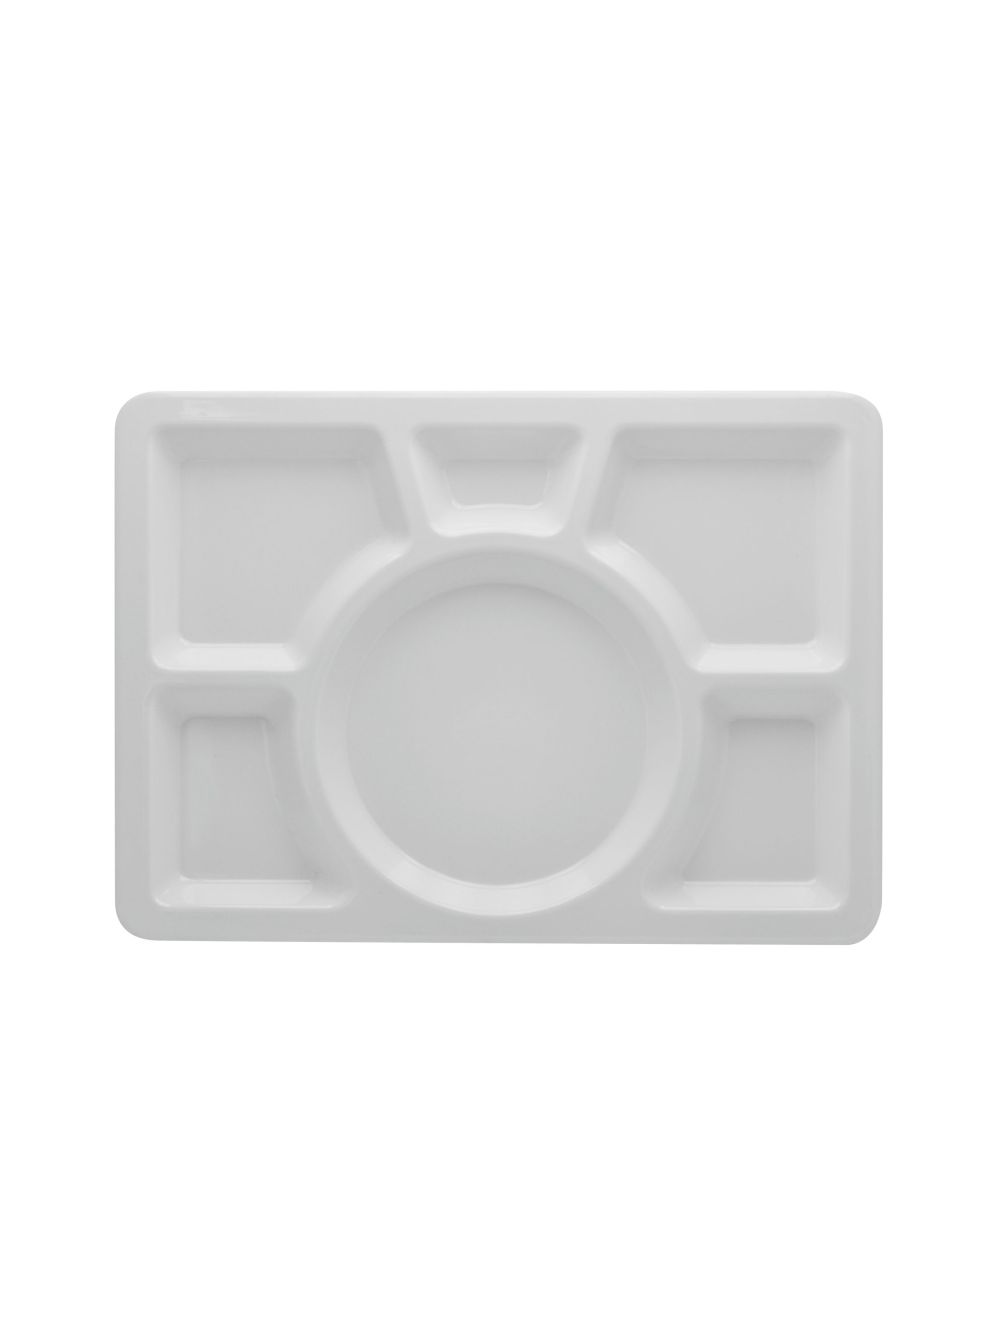 Dinewell Melamine 6 Partition Tray White-DWHP3142W